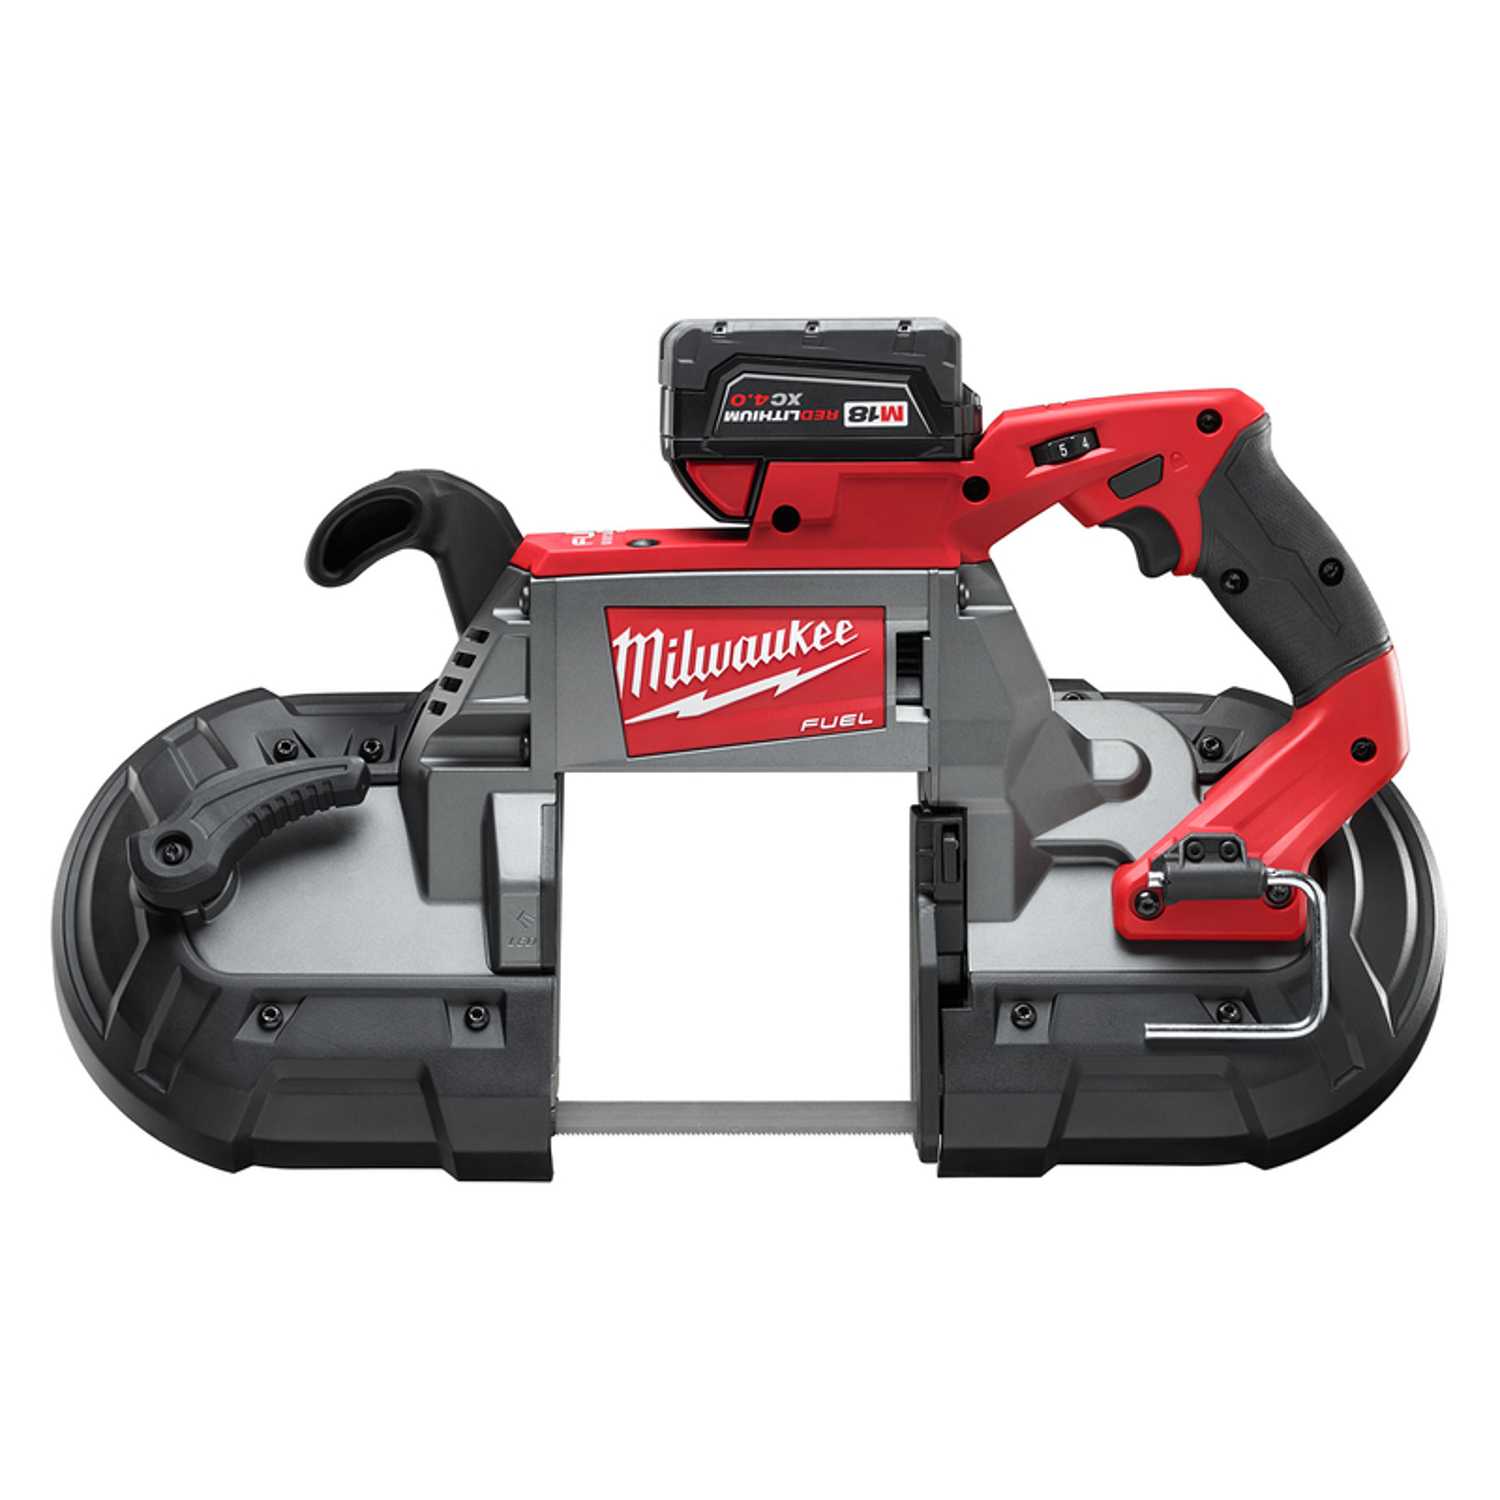 ACE Hardware  Power Tool Clearence 